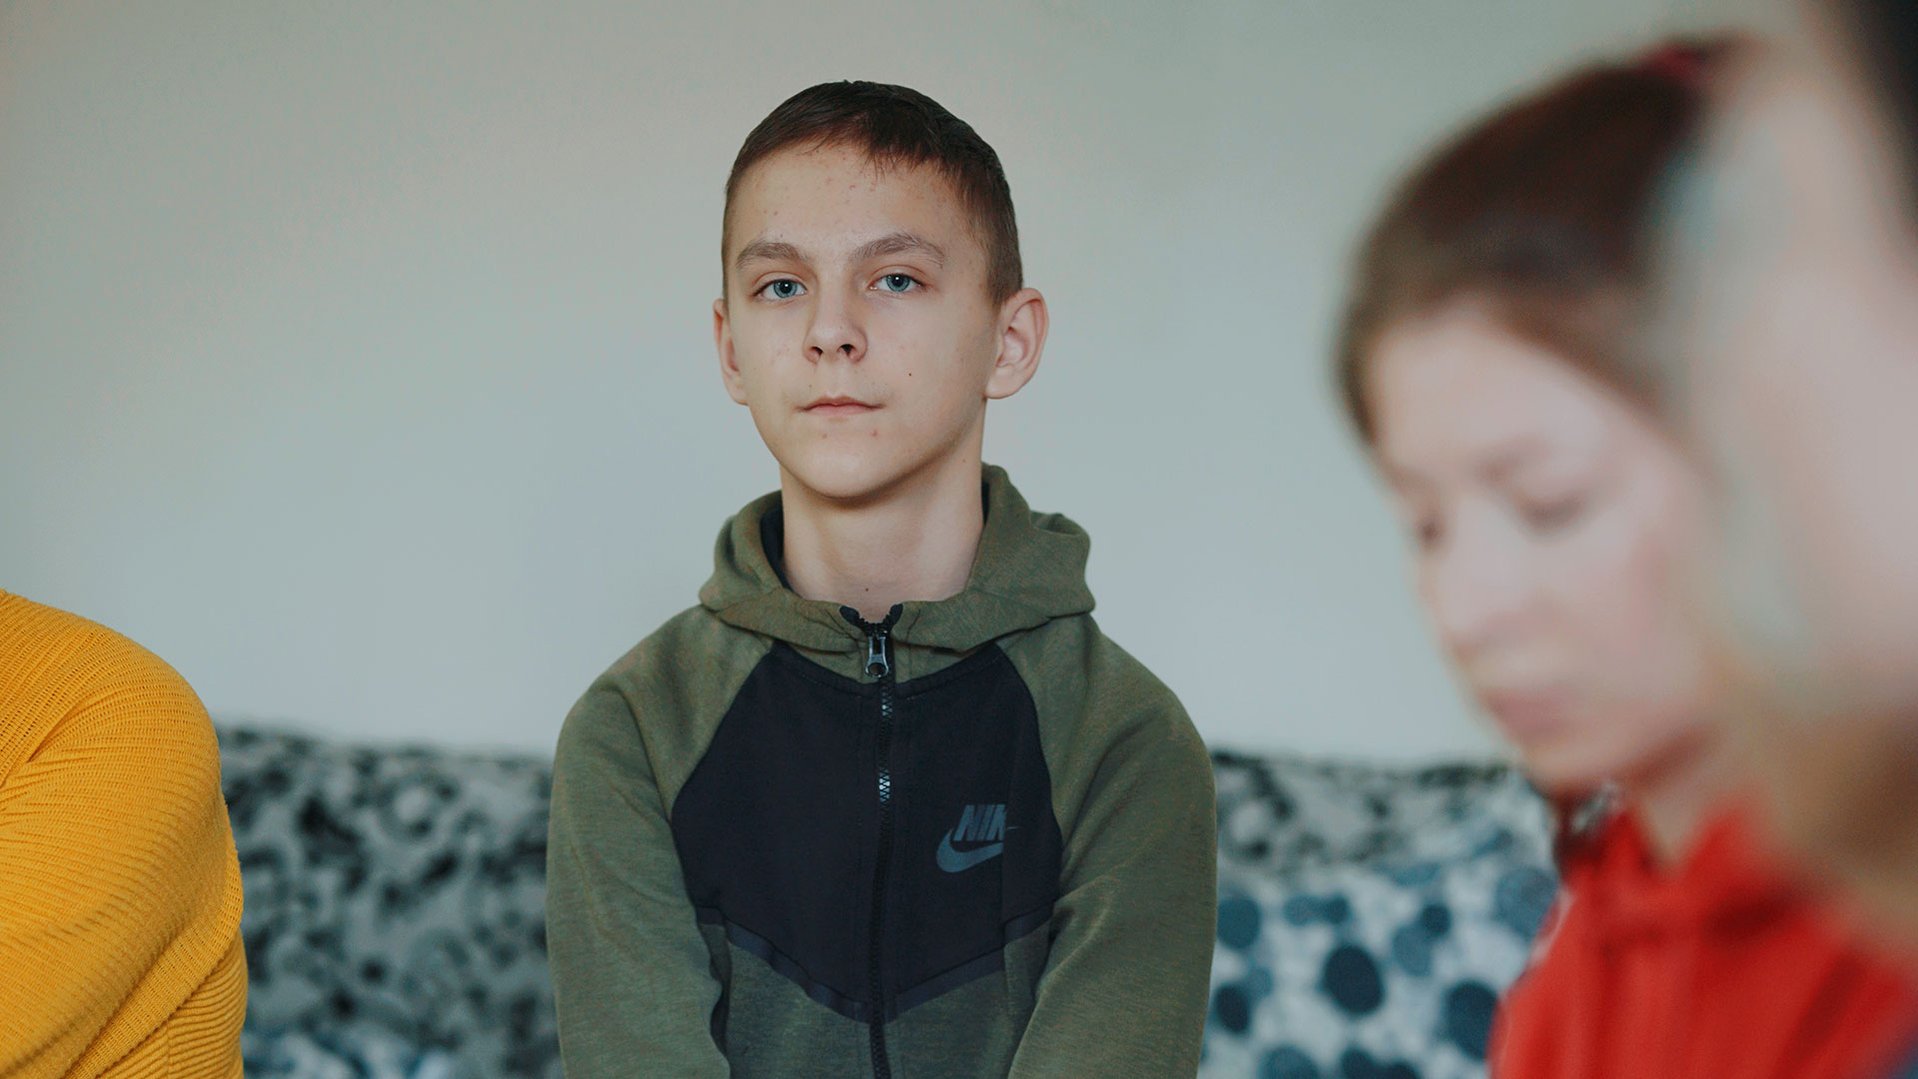 Ihor escaped the violence in Ukraine and fled with his family to Moldova, where War Child supports him